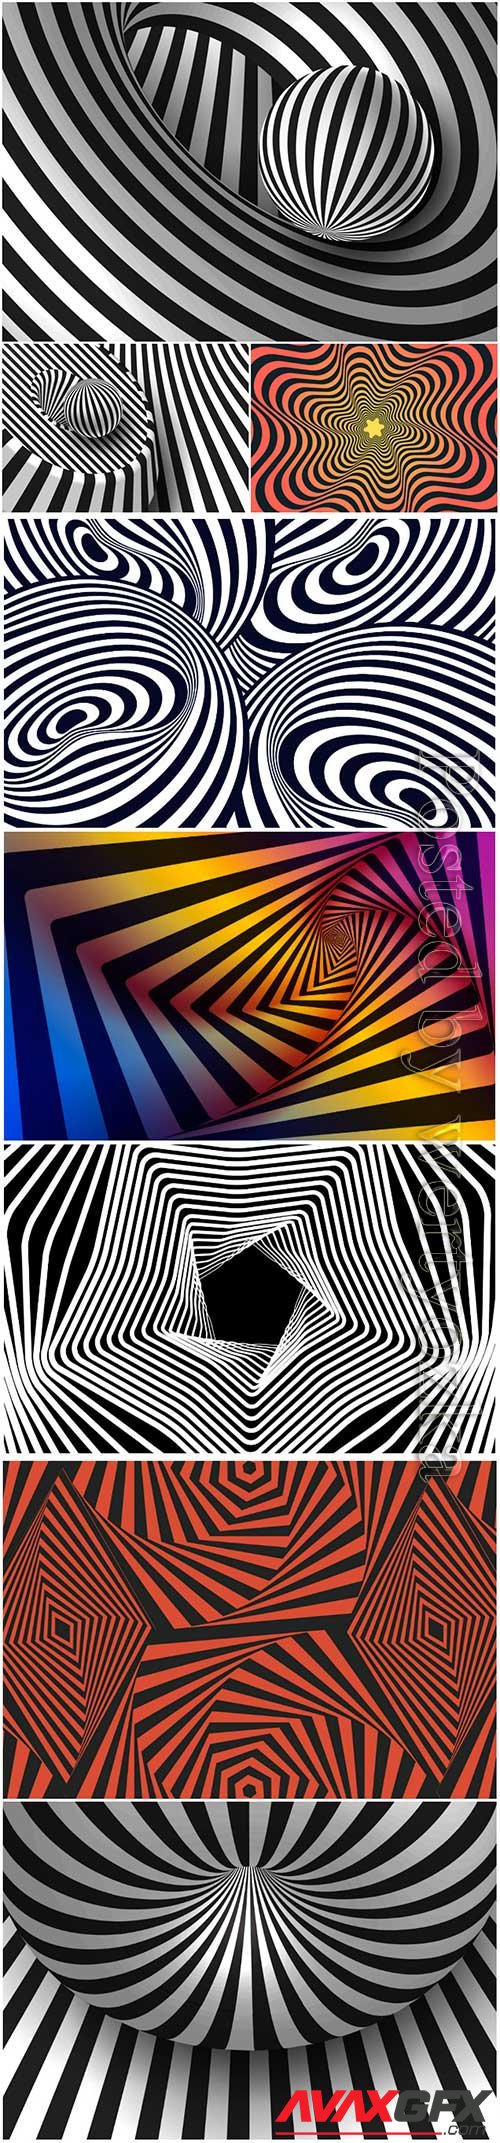 Psychedelic optical illusion vector background # 9